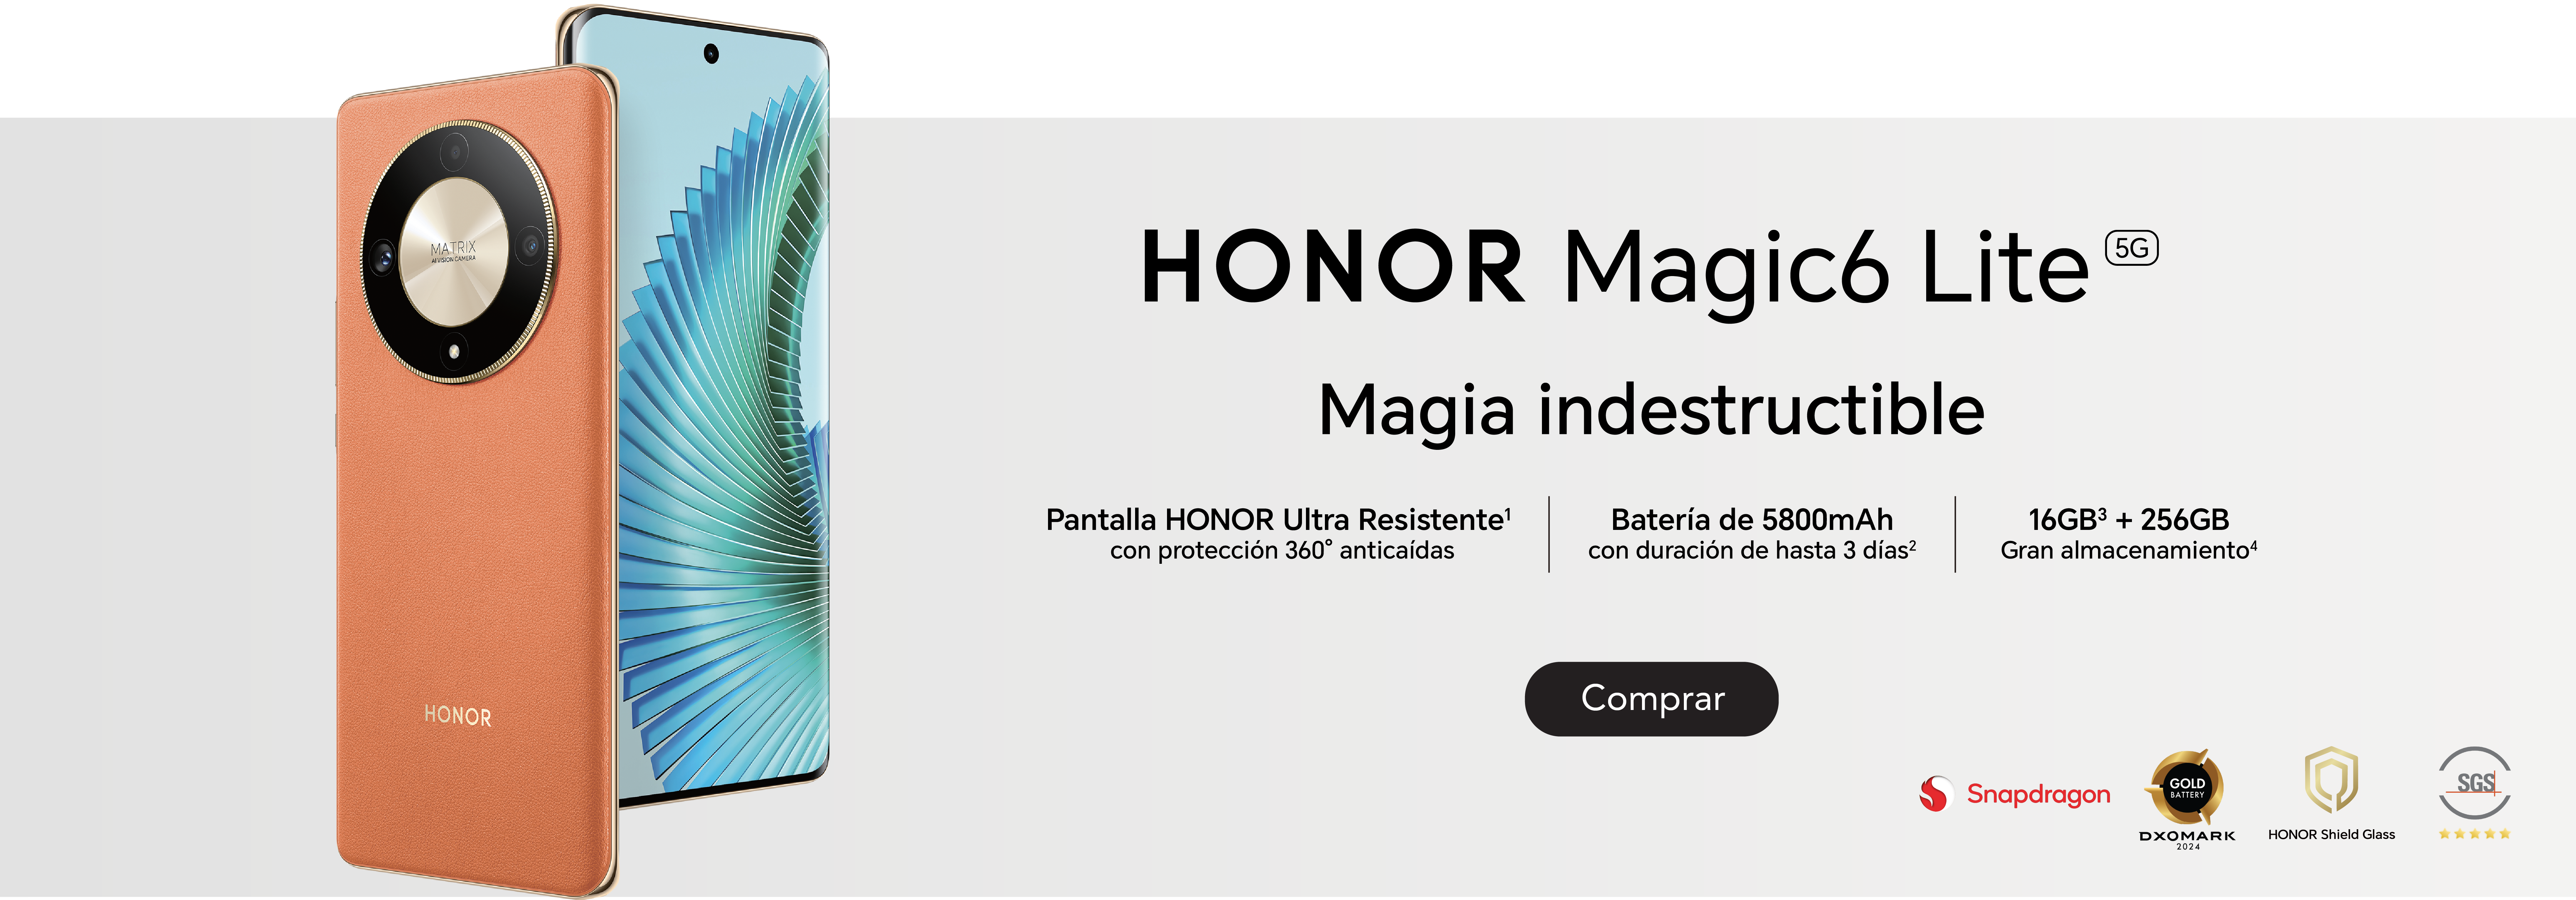 BANNERS M6L 1860X650 MARZO-02